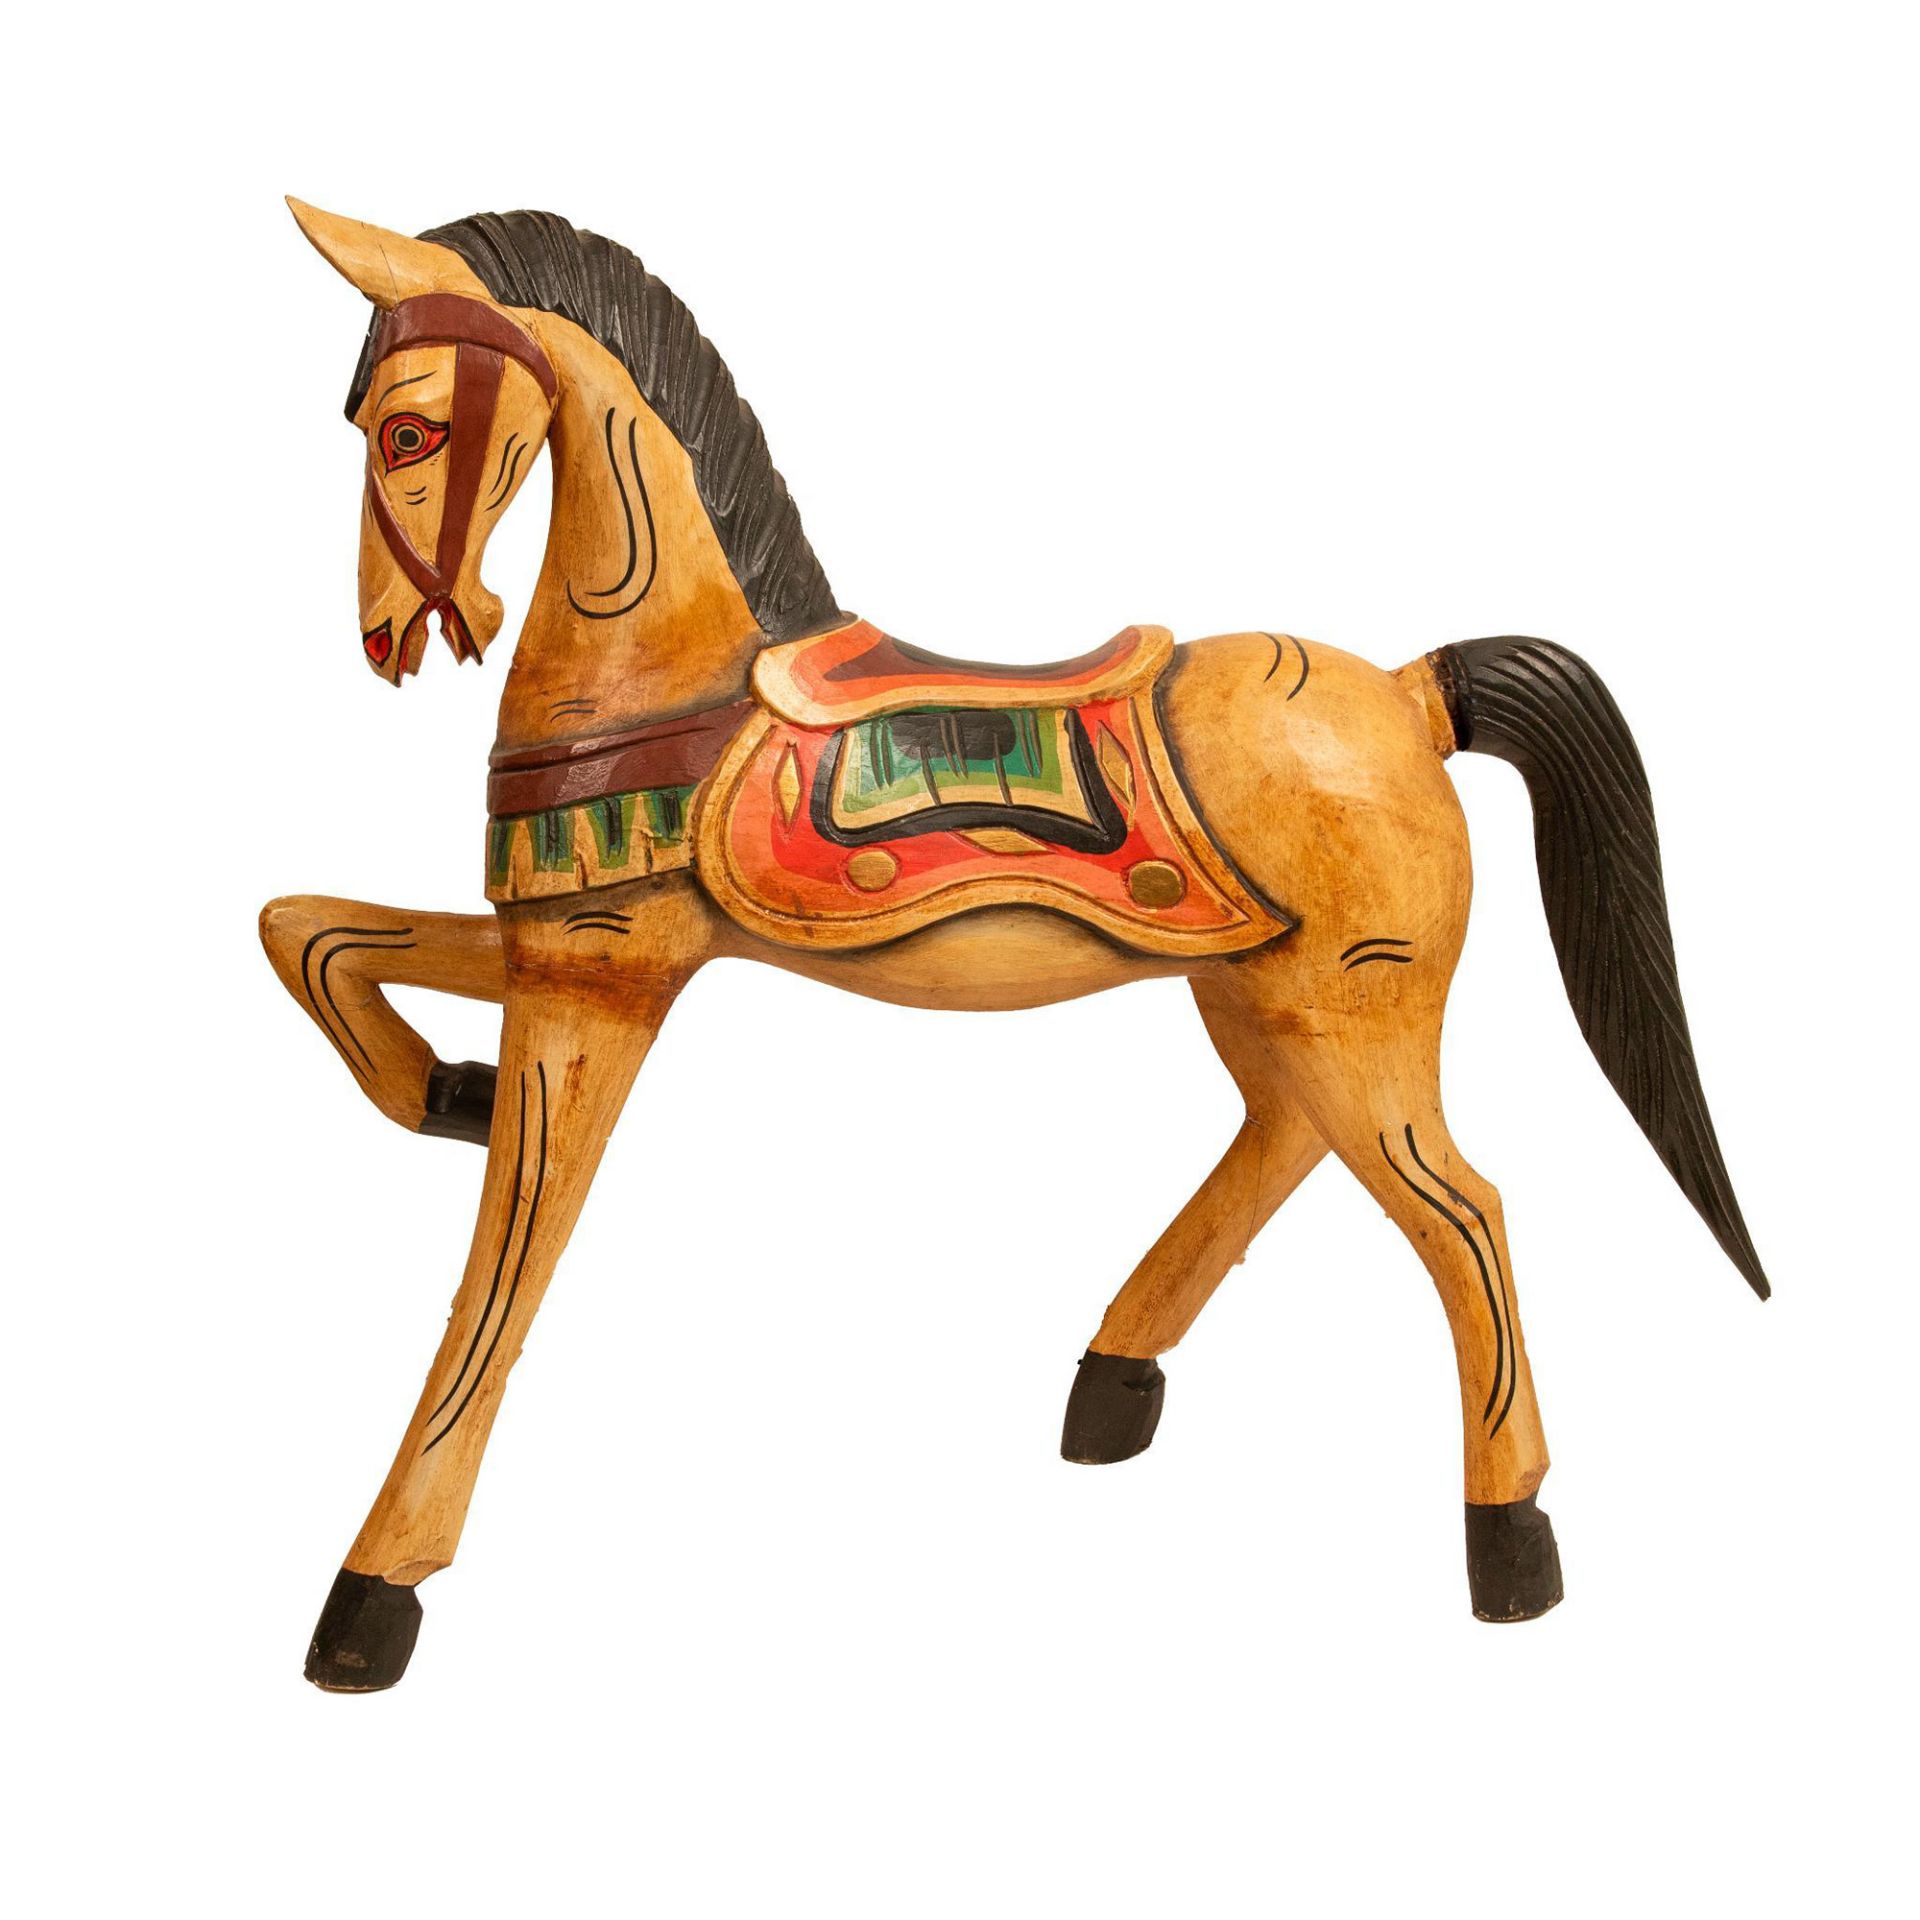 Vintage Wooden Carousel Style Horse Statue